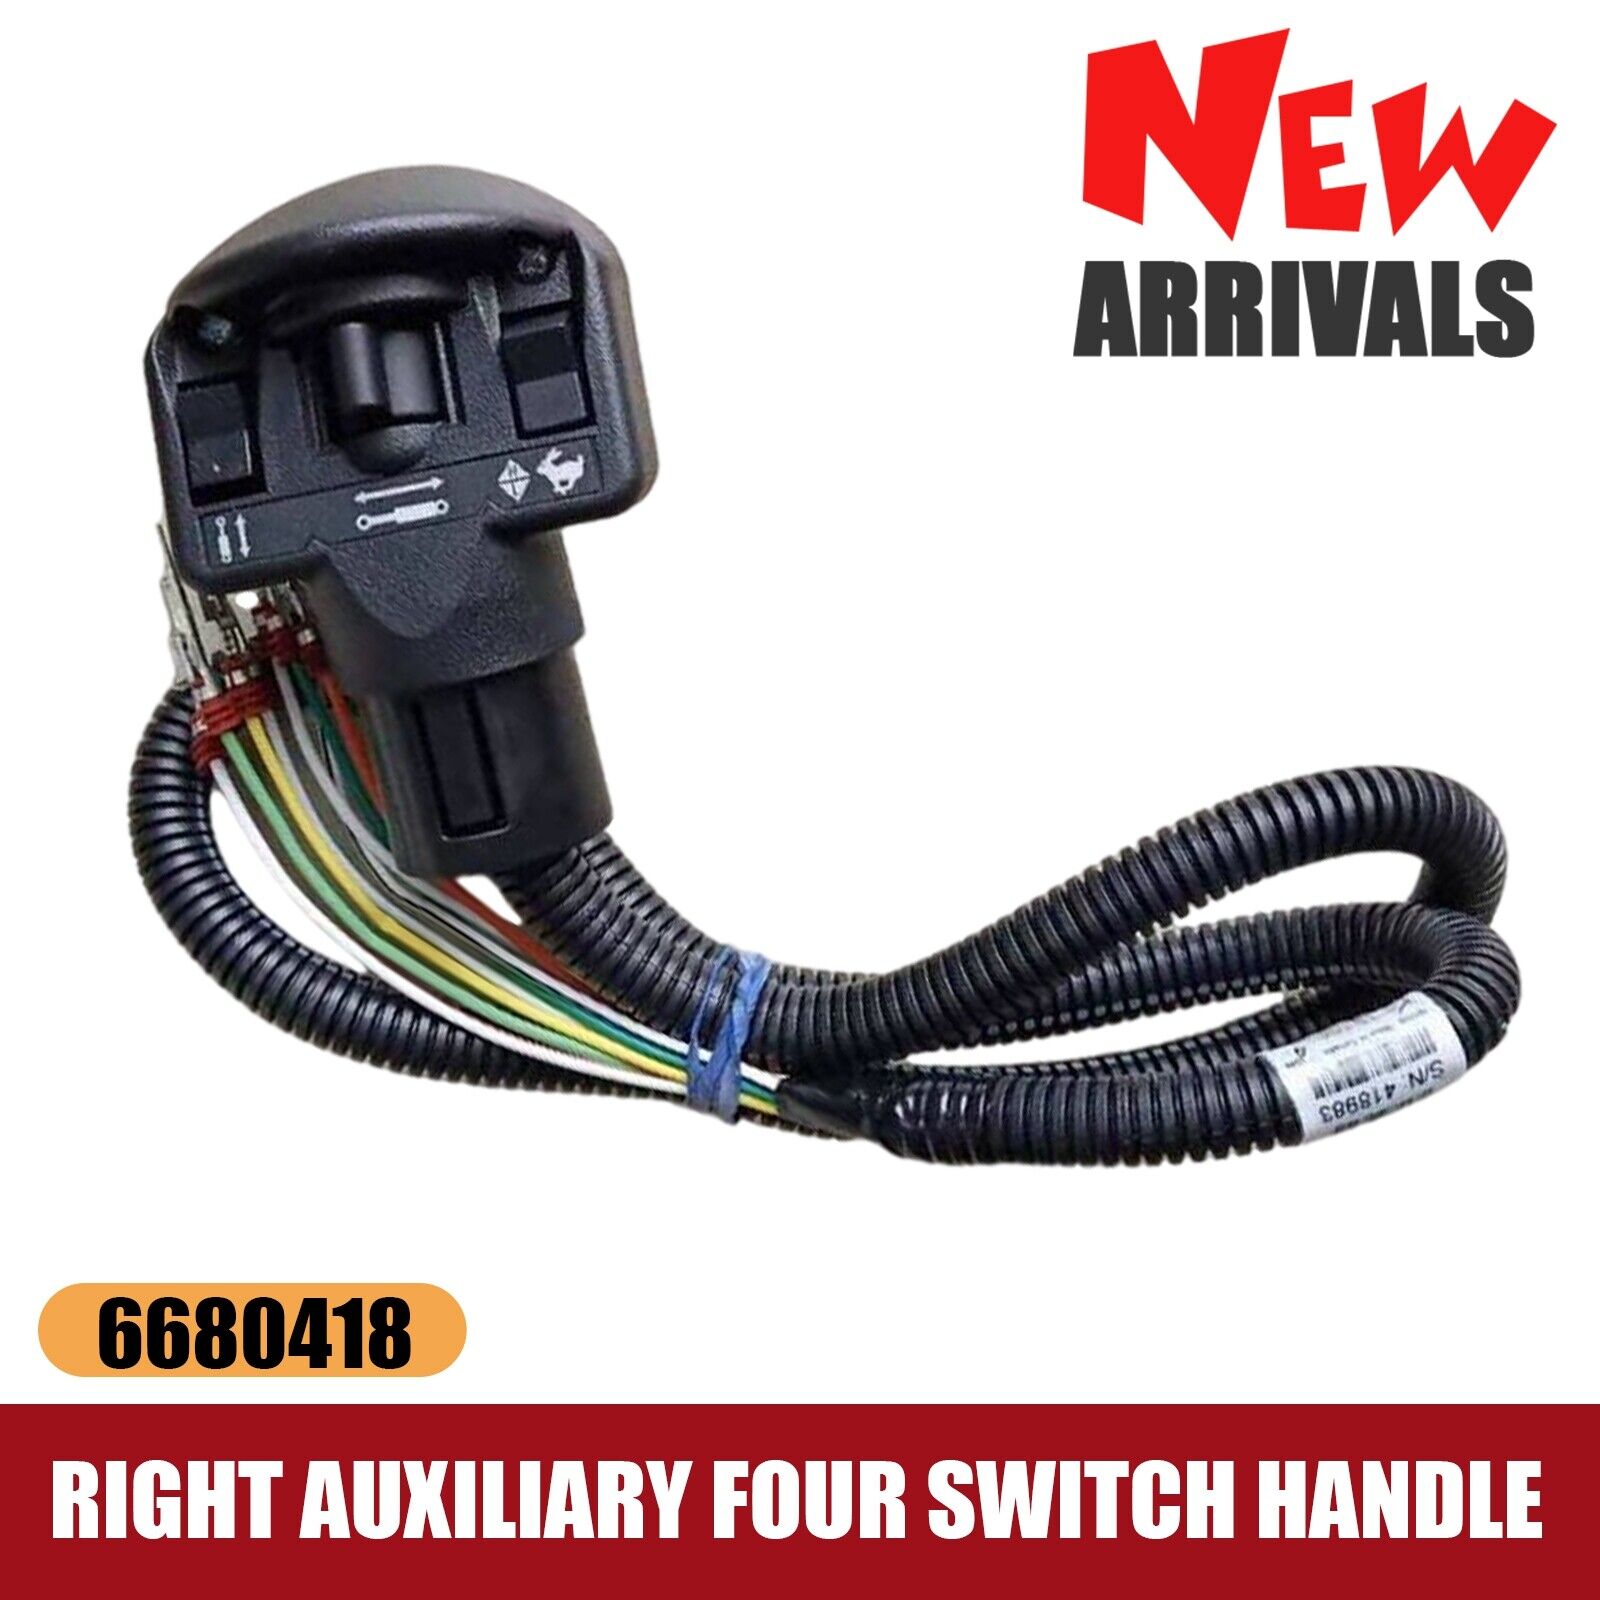 Right Auxiliary Four Switch Handle For Bobcat S150 S175 S185 S205 S250 S300 S330